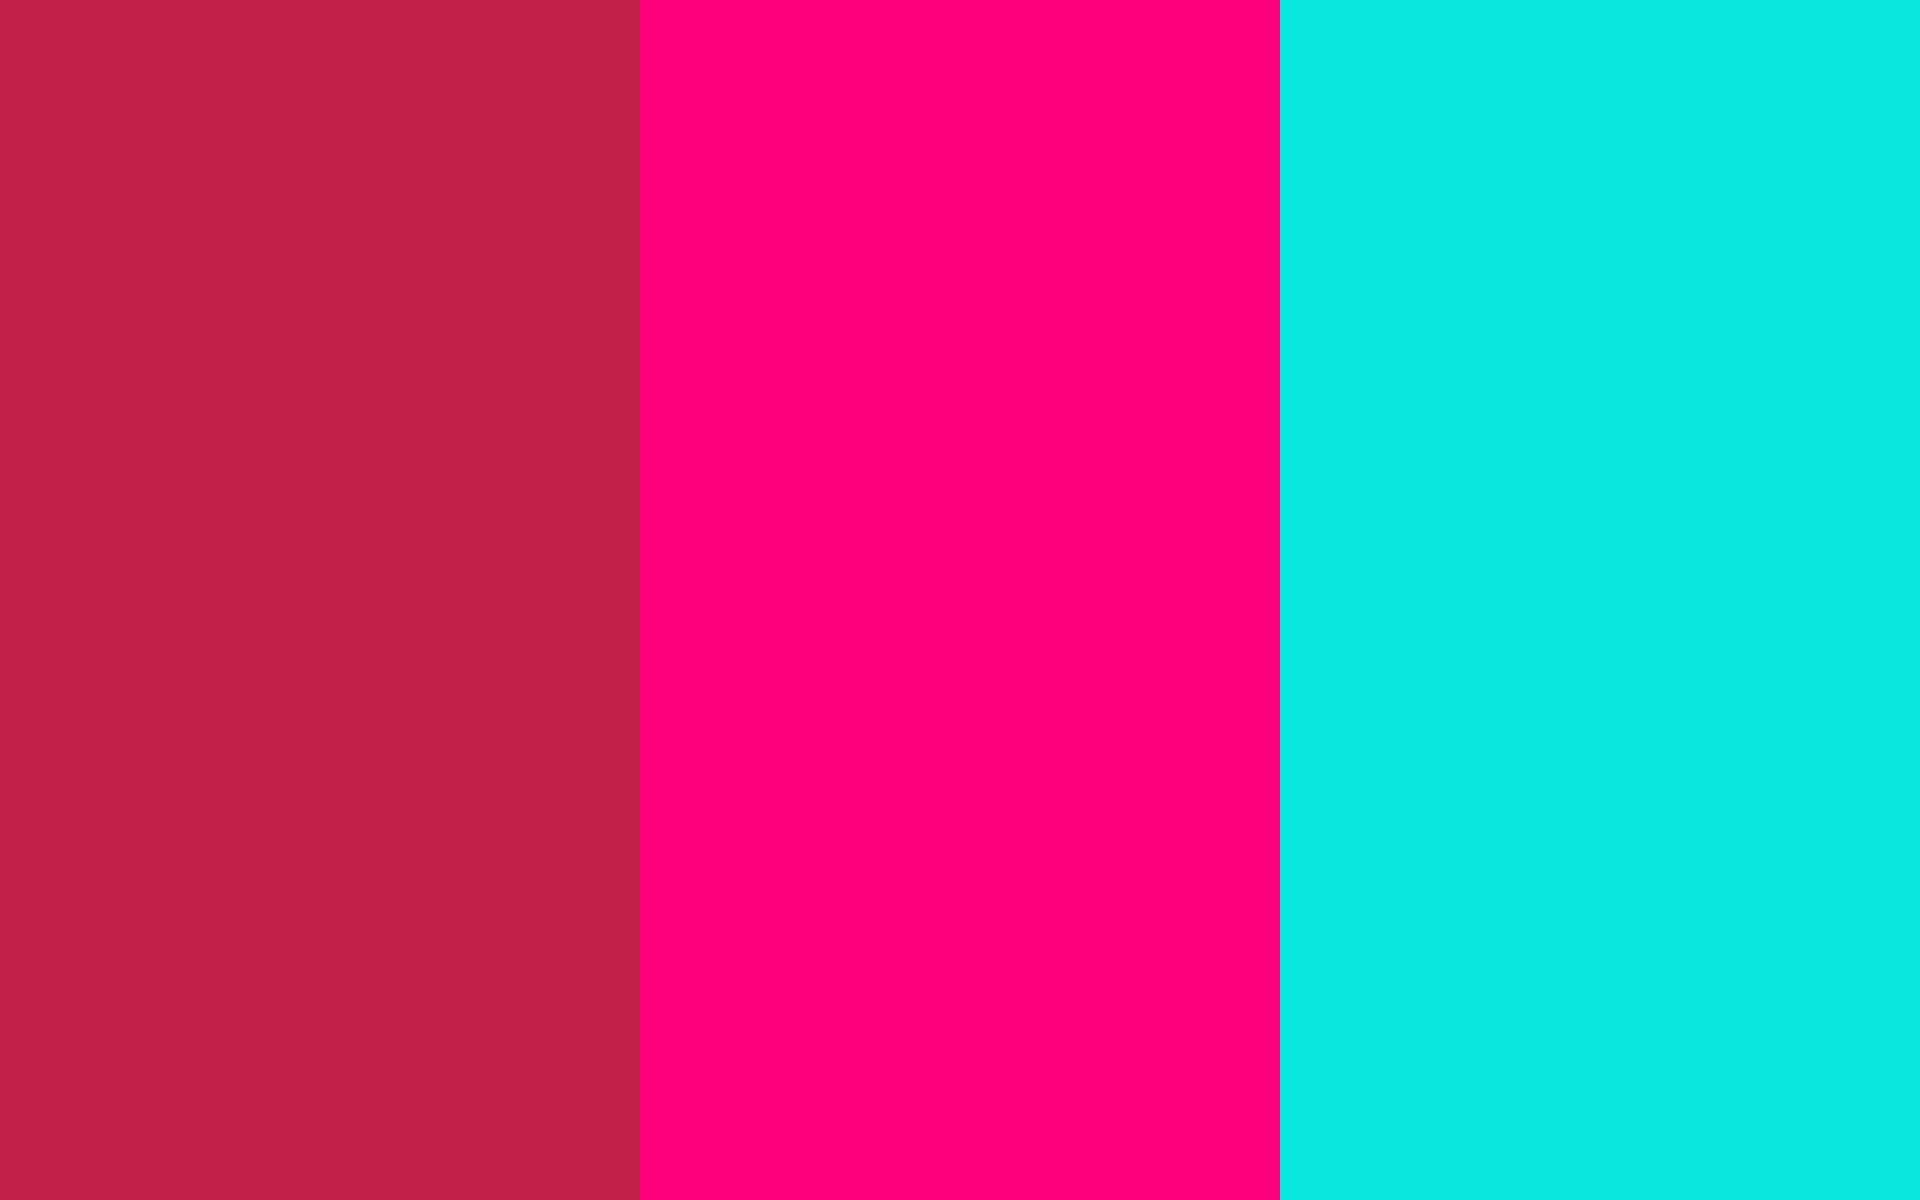 Bright Maroon, Bright Pink and Bright Turquoise Three